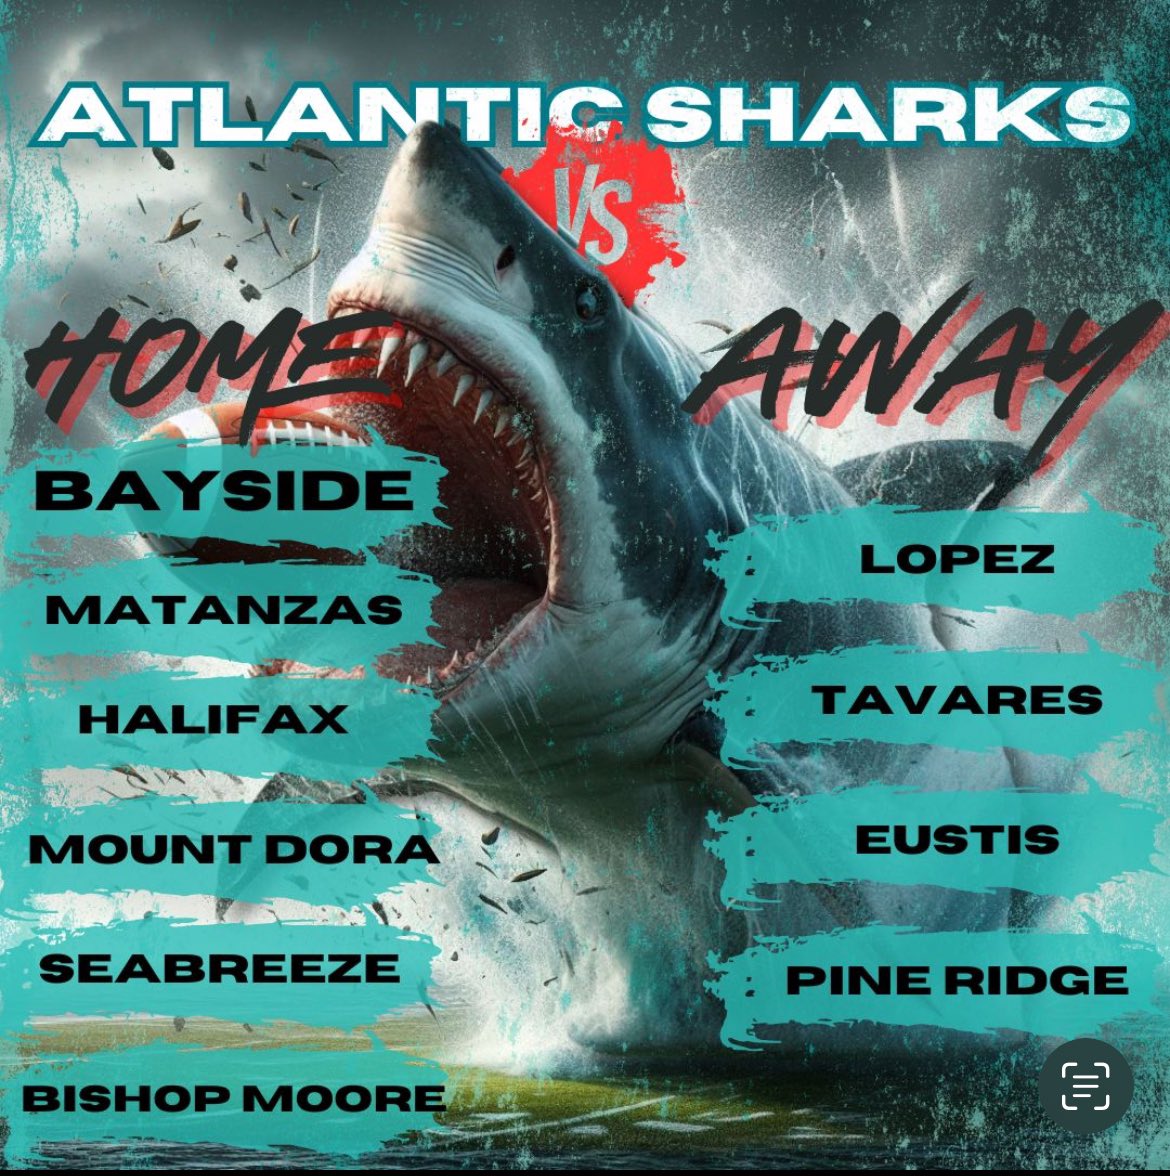 Dates and times to be updated, but here is the tentative 24’-25’ season schedule for your Atlantic Sharks! #sharks #megladon #reedcanalfootball #sharksnation #fhsaa #highschoolfootball